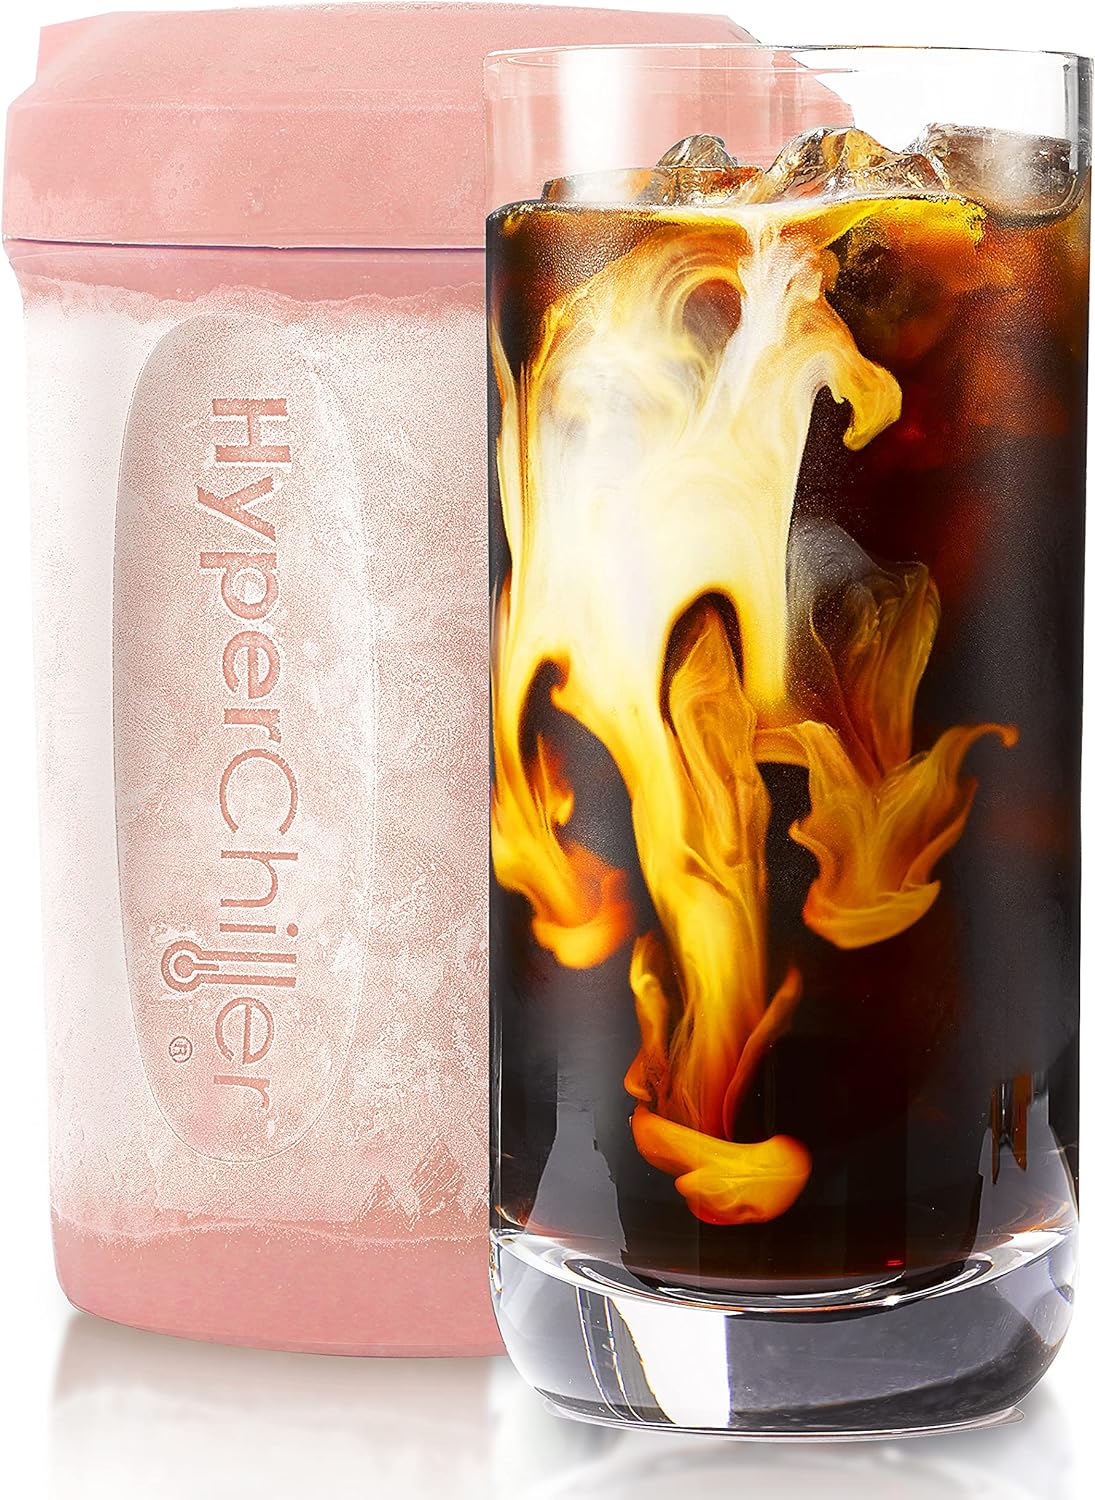 12.5-Oz HyperChiller HC2M Iced Coffee/Beverage Cooler (Various) from $9.30 + Free Shipping w/ Prime or on orders over $35